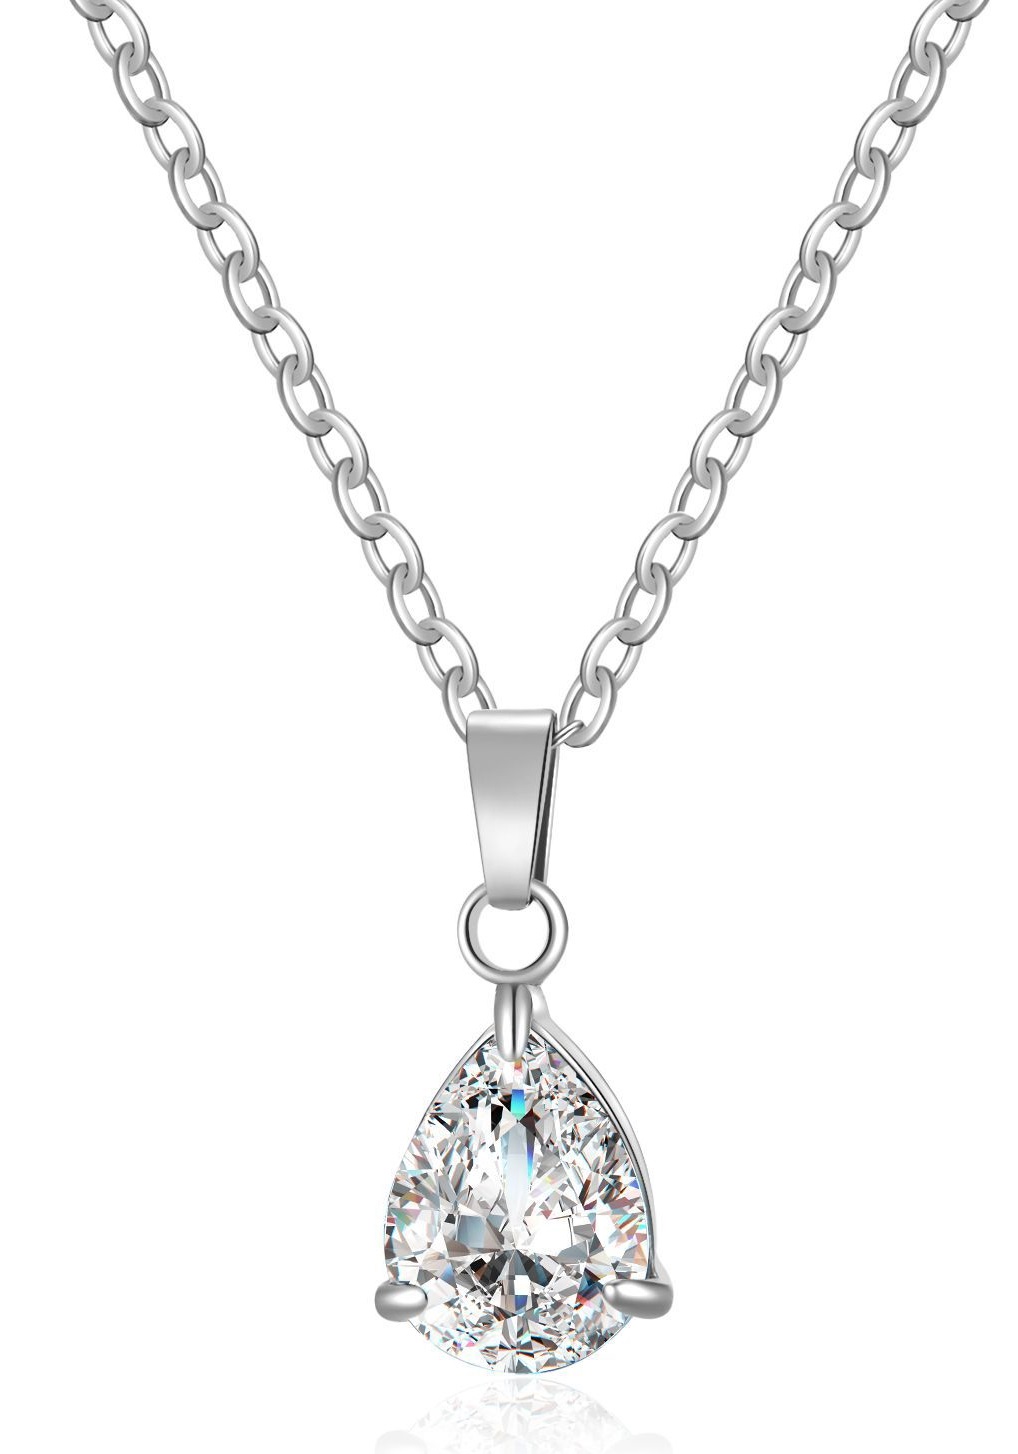 H-A21.1 N101-023S S. Steel Necklace CZ